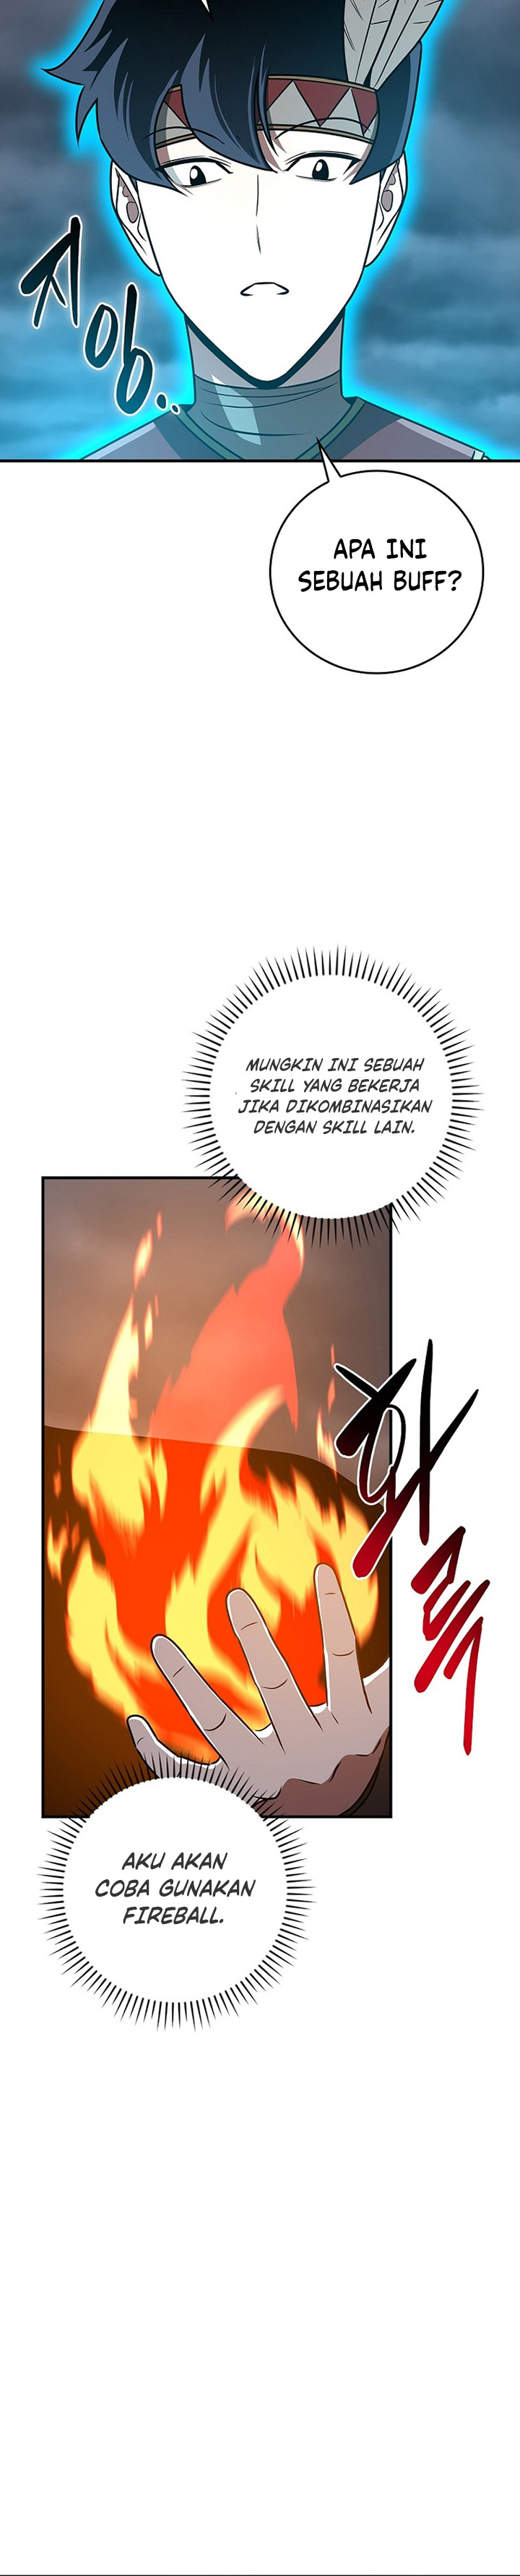 Archmage Streamer Chapter 96 S2 End - 299